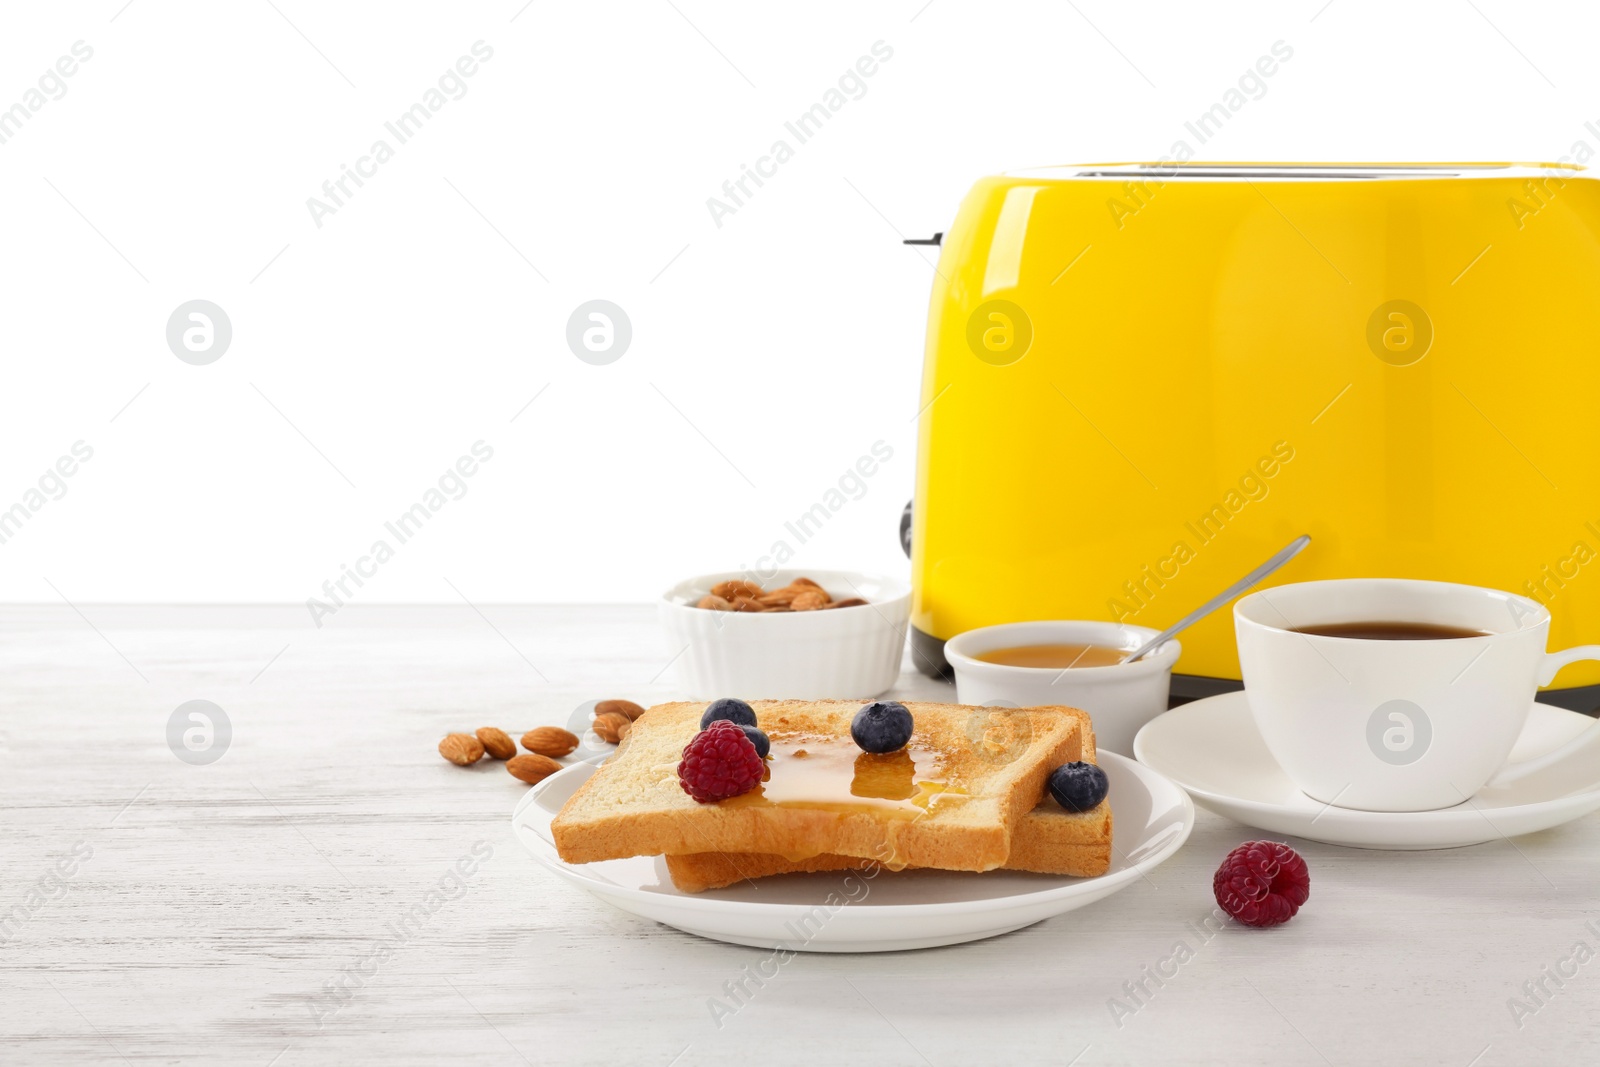 Photo of Delicious breakfast with toasted bread and berries served on wooden table against white background. Space for text